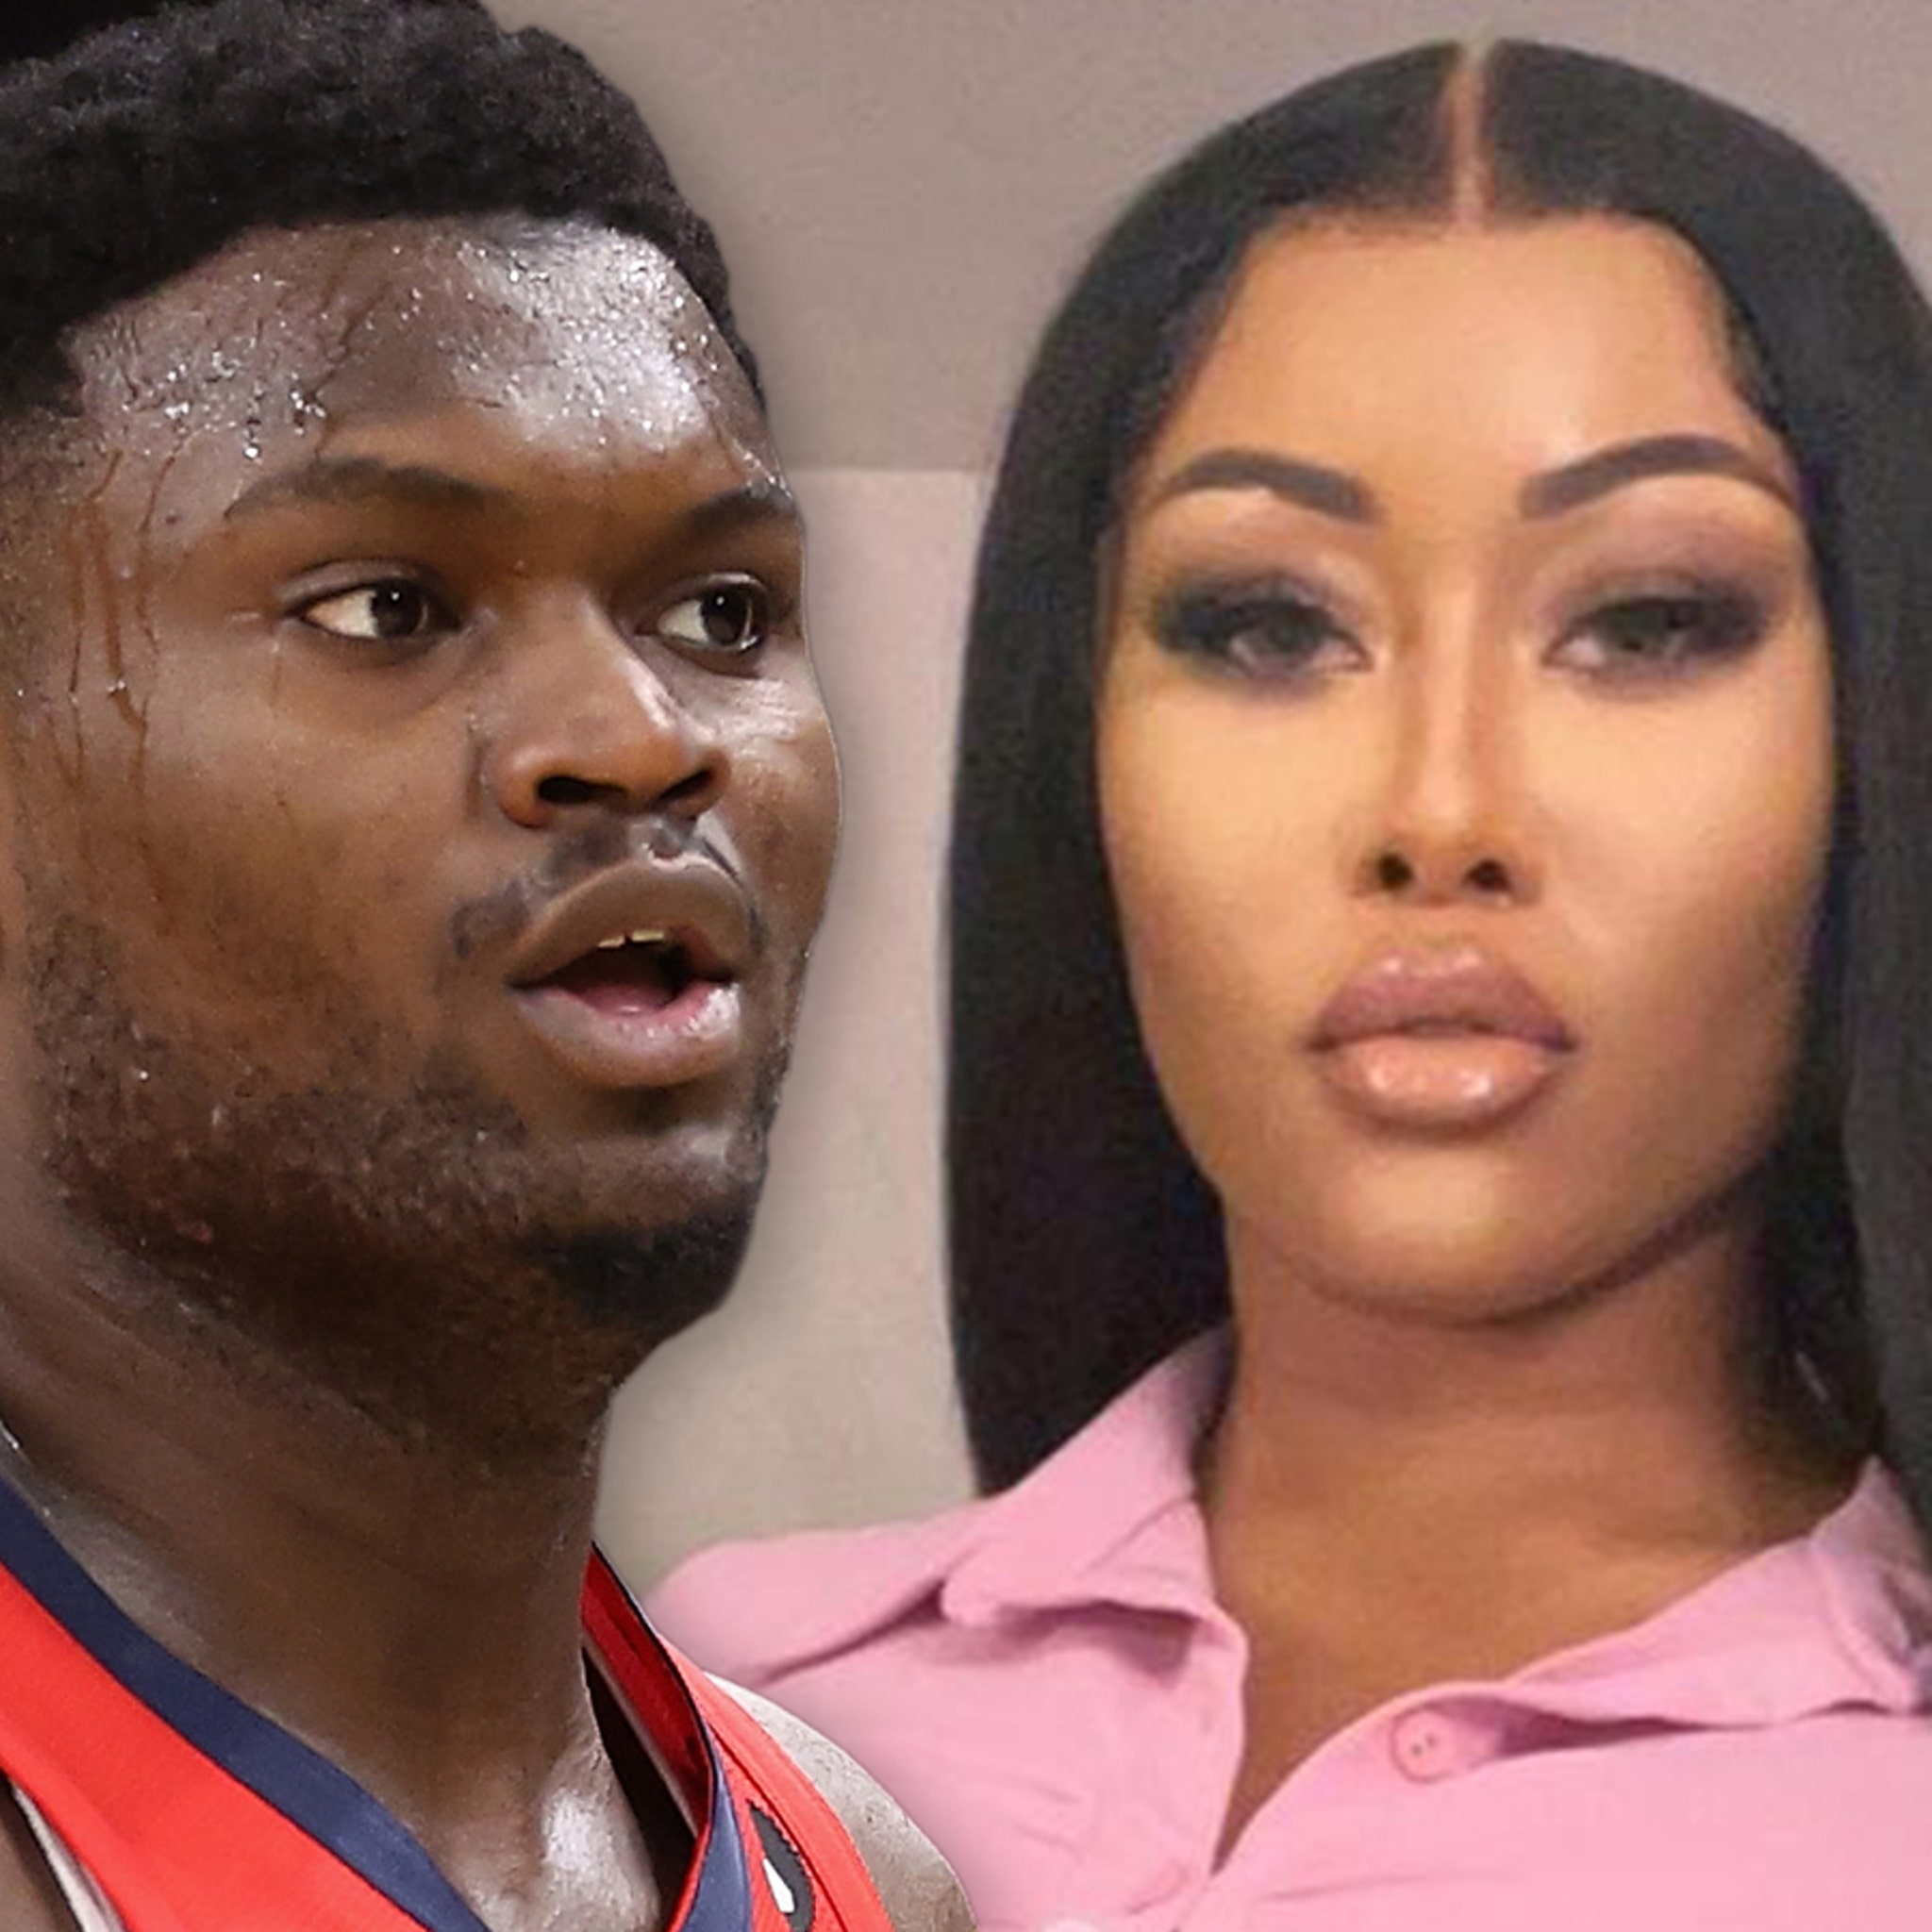 Rakhisawant Xxxvid - Zion Williamson Called Out By Porn Star, Better Pray I'm Not Pregnant, Too!